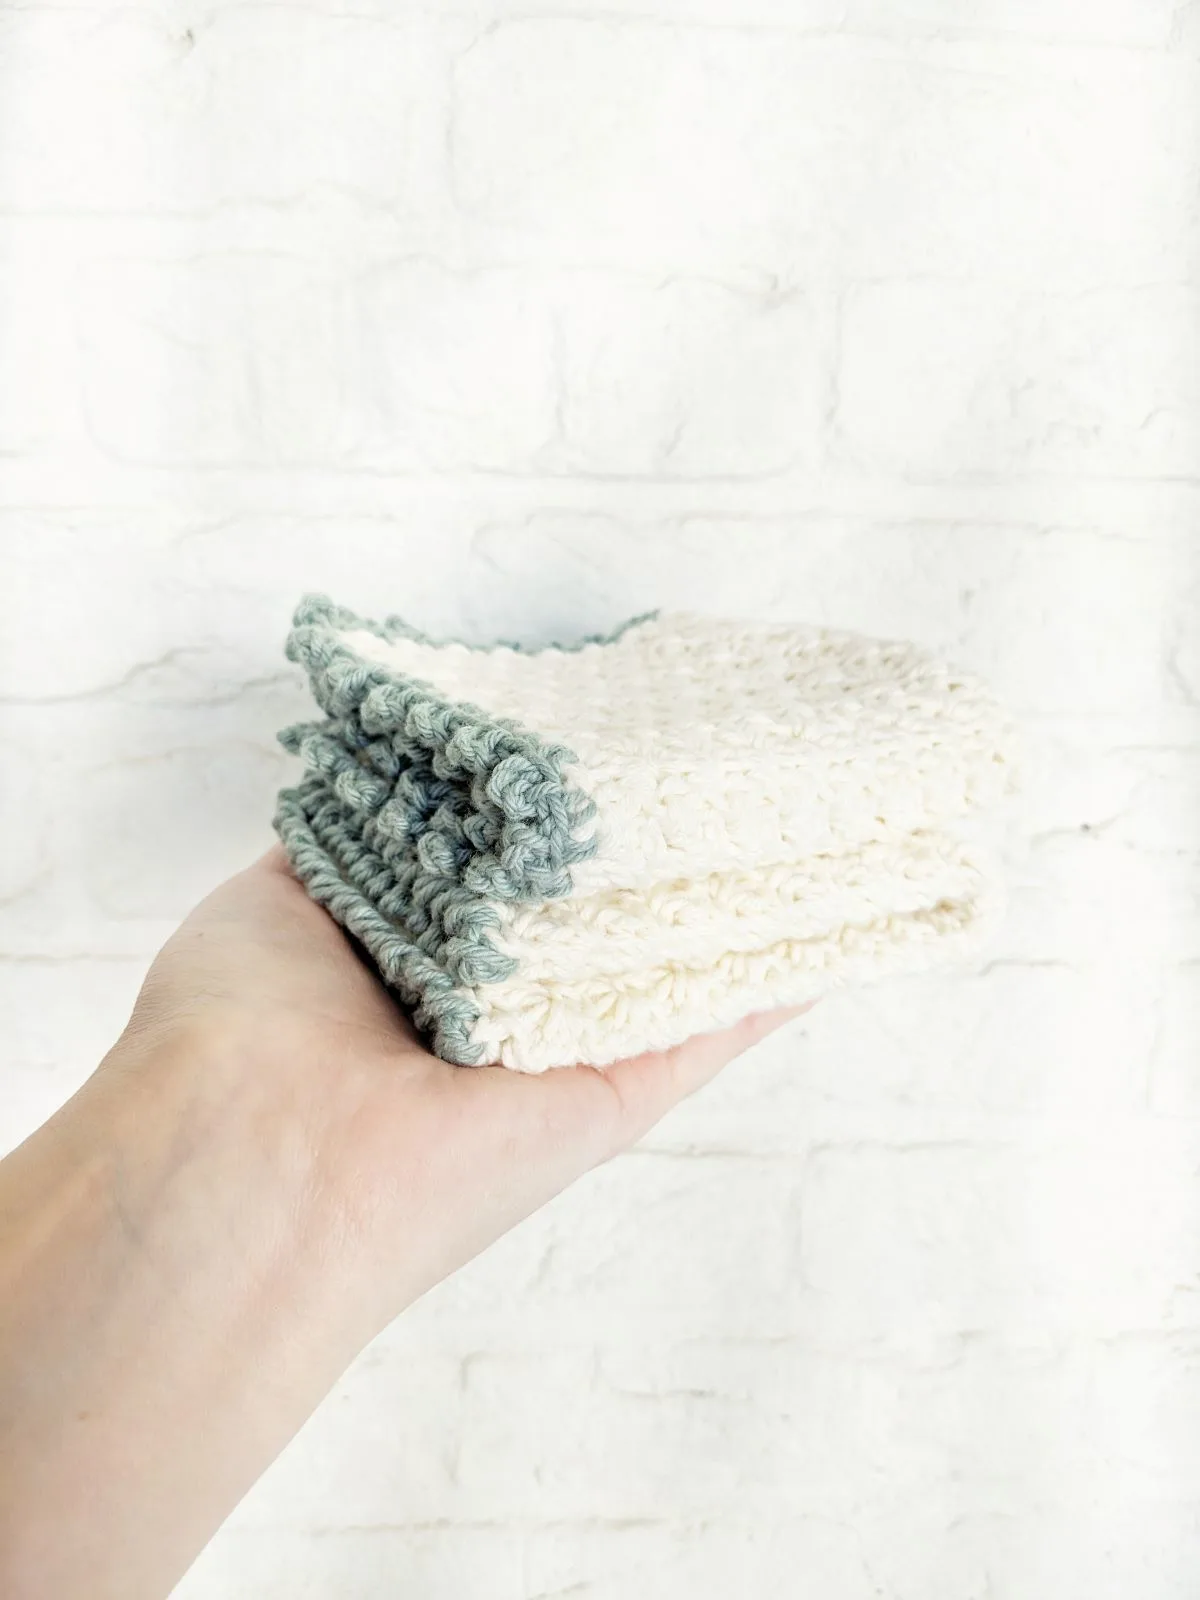 A crochet washcloth that uses the suzette stitch with a picot stitch border.